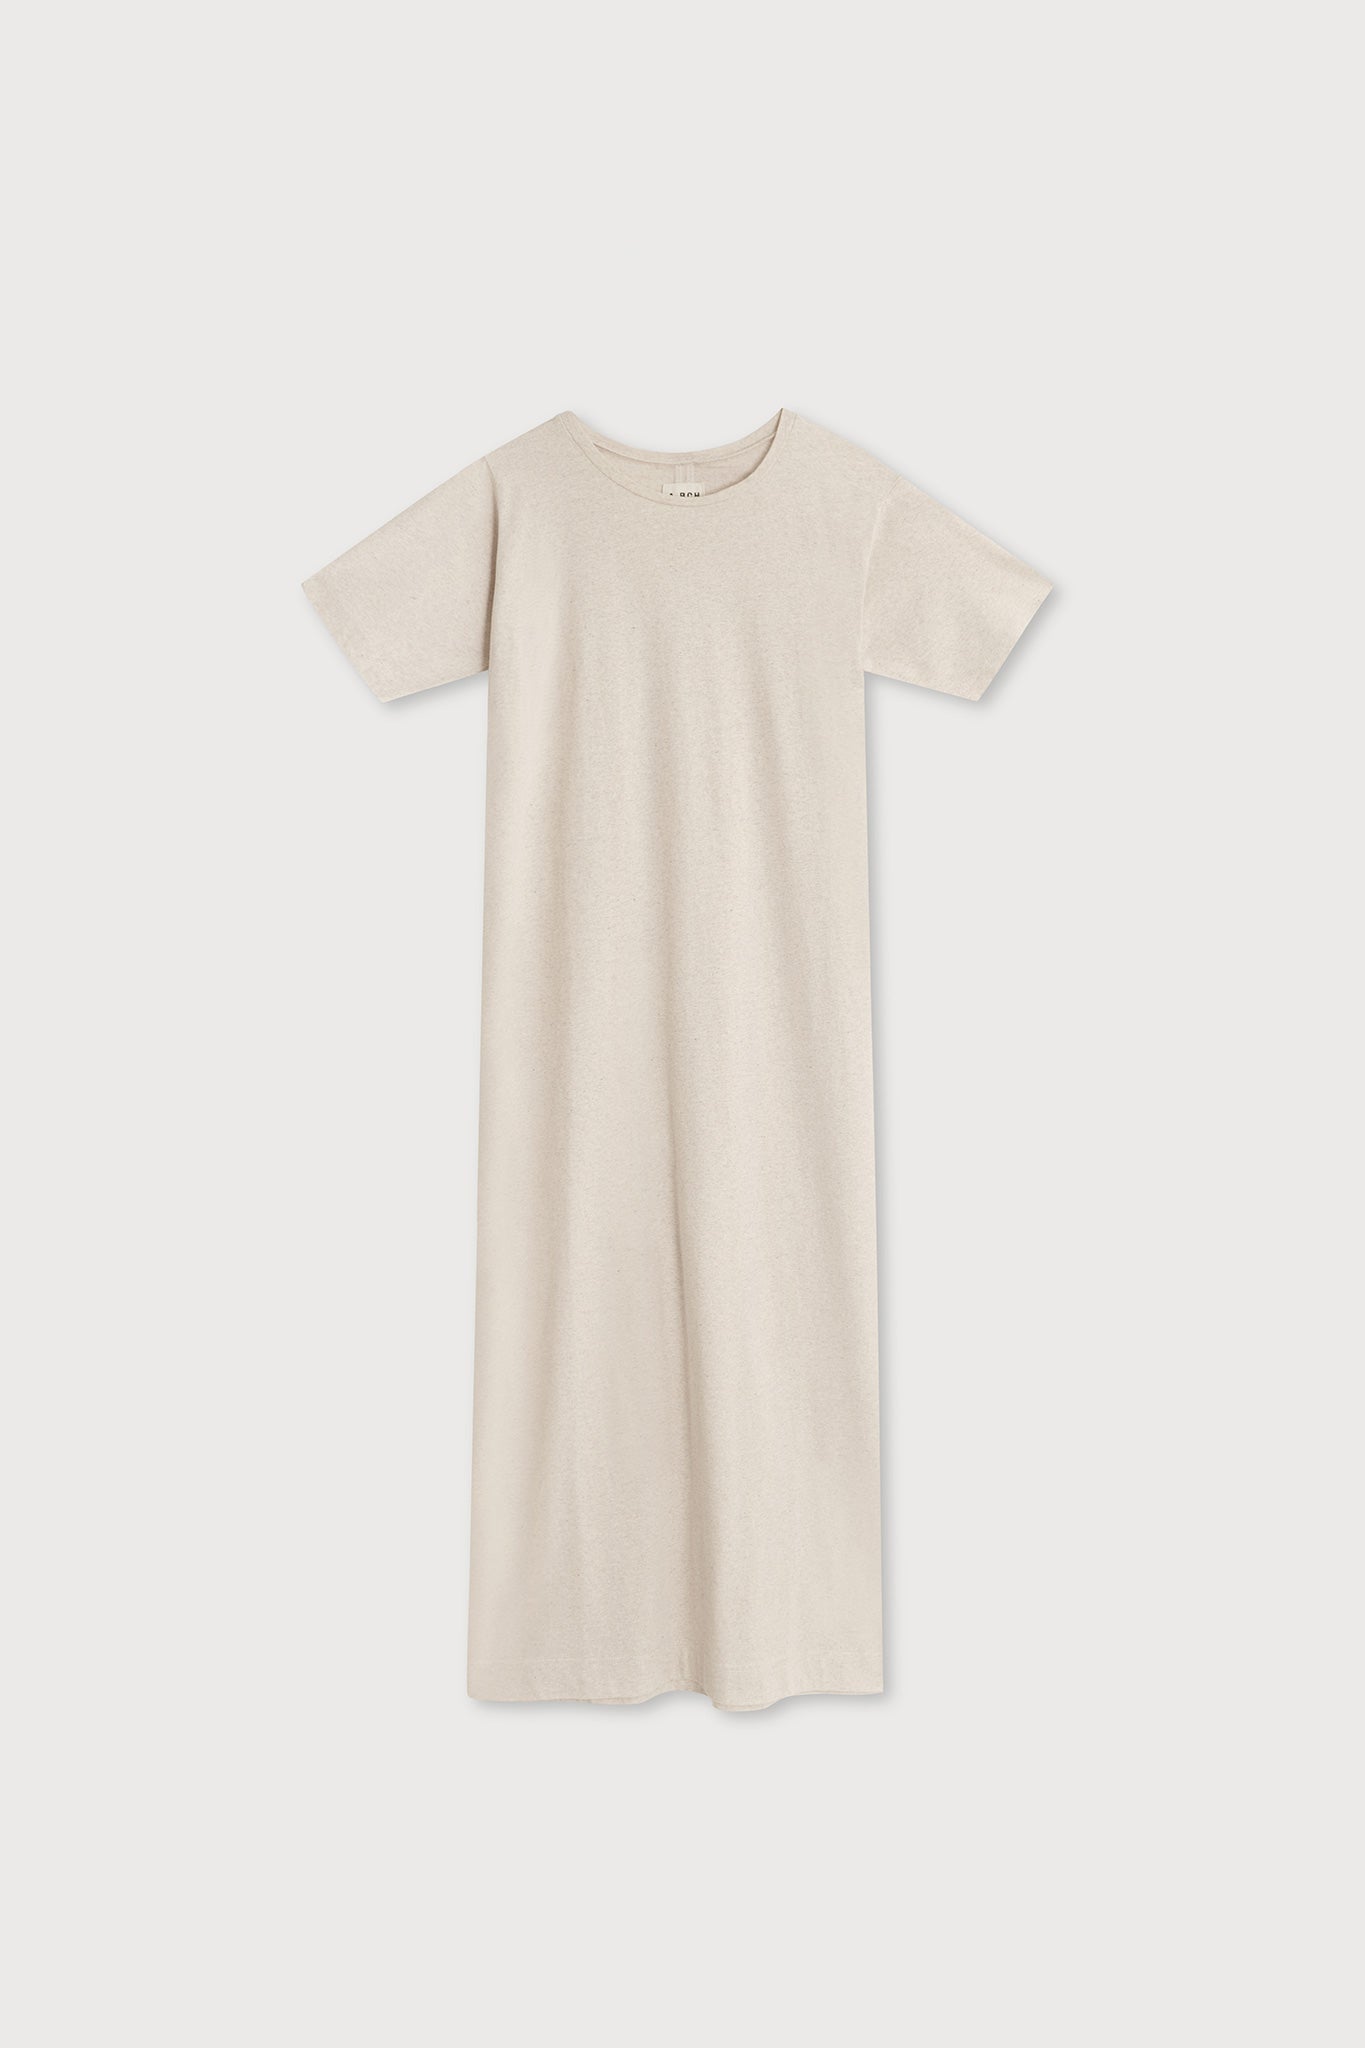 A.56 Oat Marle Maxi T-Shirt Dress in Recycled + Organic Cotton